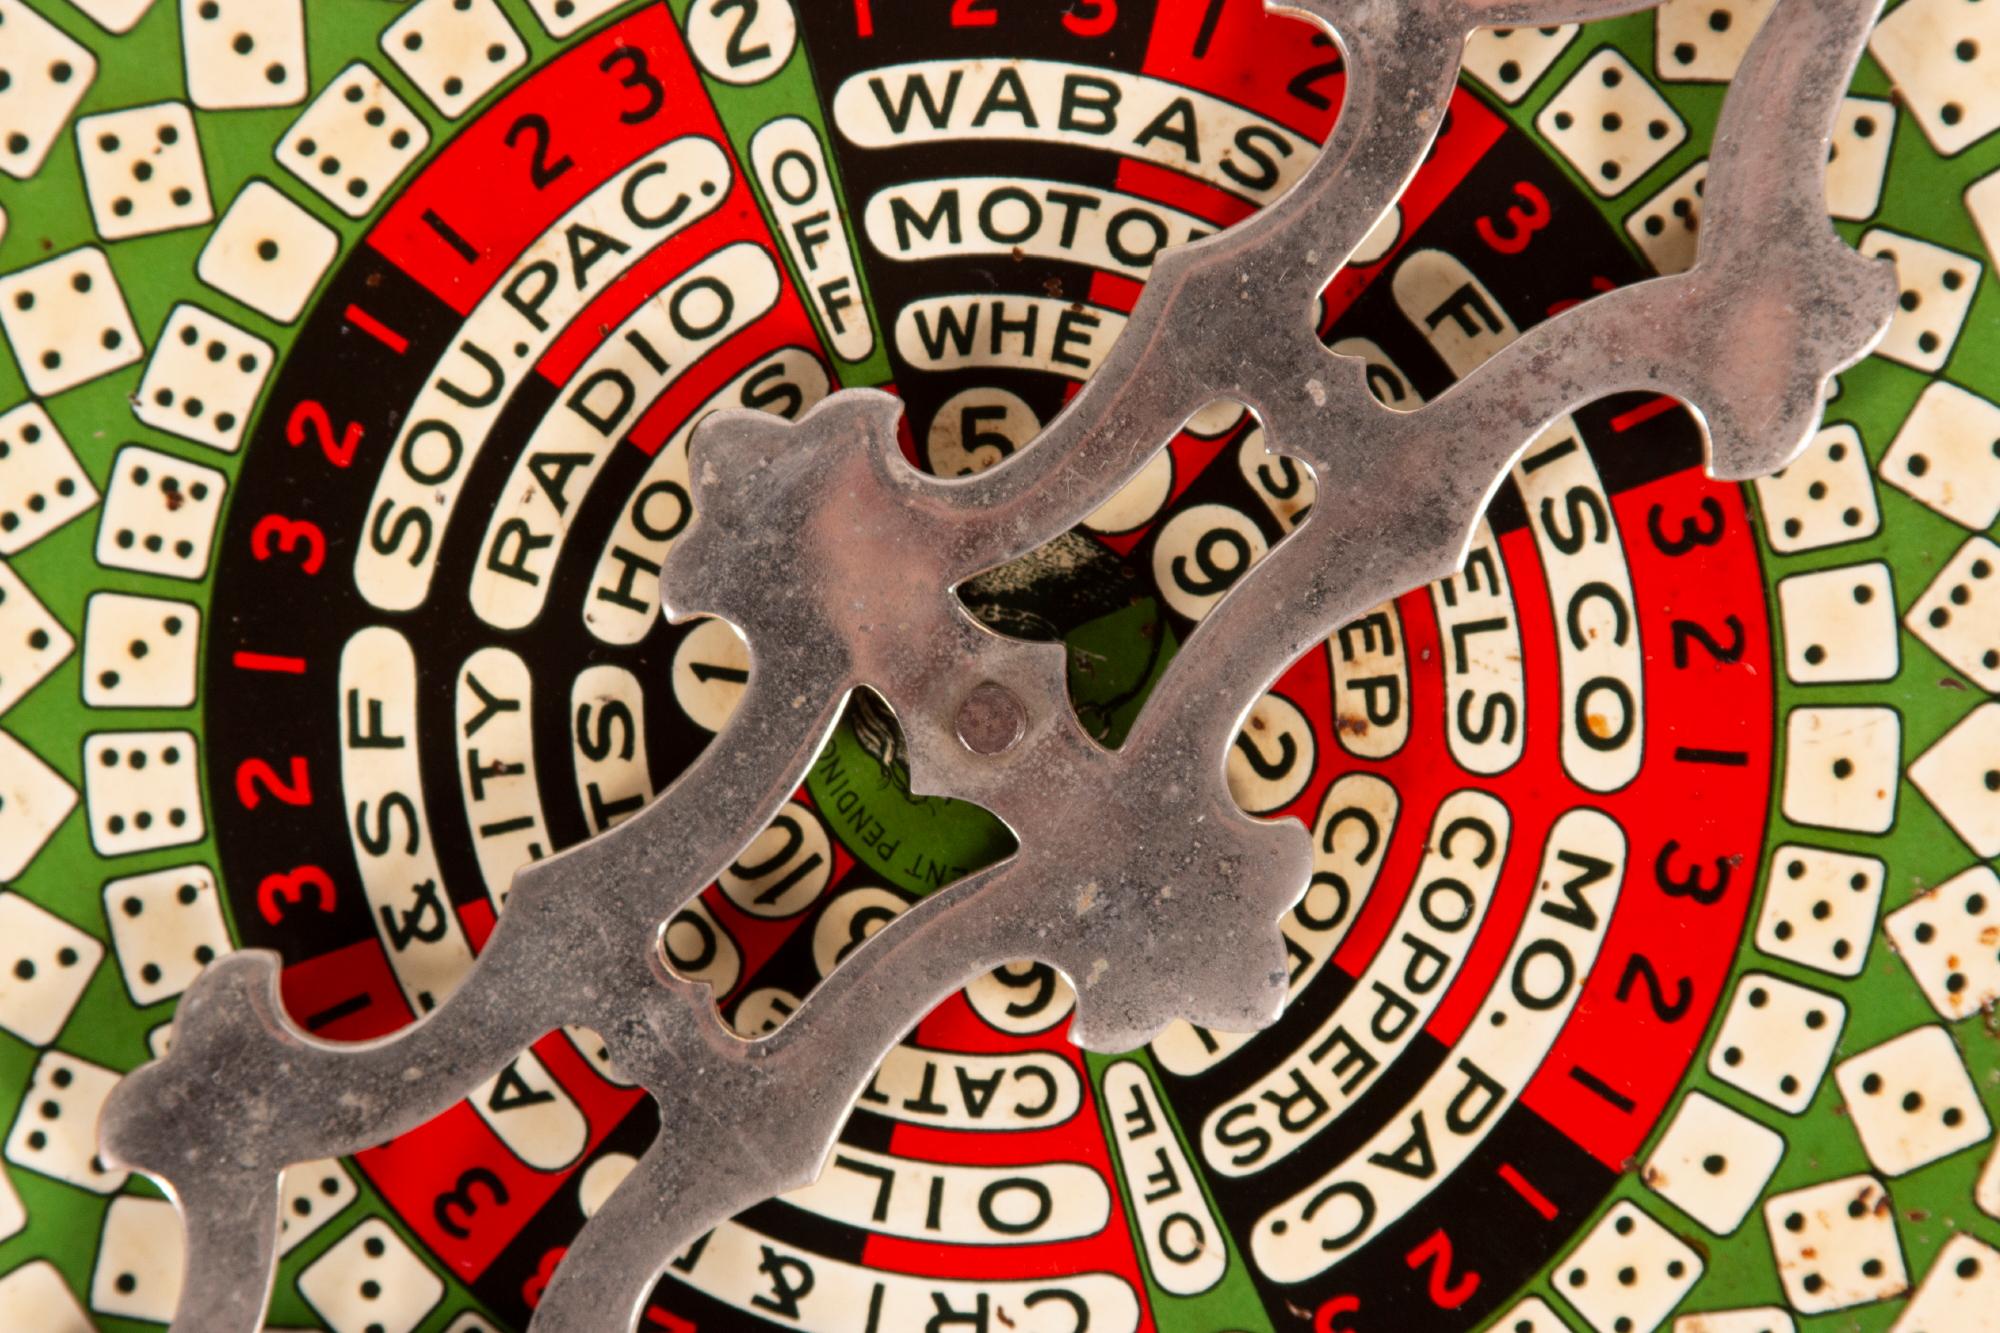 COLORFUL PAINTED SHEET METAL GAME WHEEL ON A SHAPED WOODEN FRAME WITH A NICKLE-PLATED SPINNER, circa 1890-1910

Red, black, white, and green game wheel with a horse head in the center beneath a large and elaborate, nickel-plated, removable